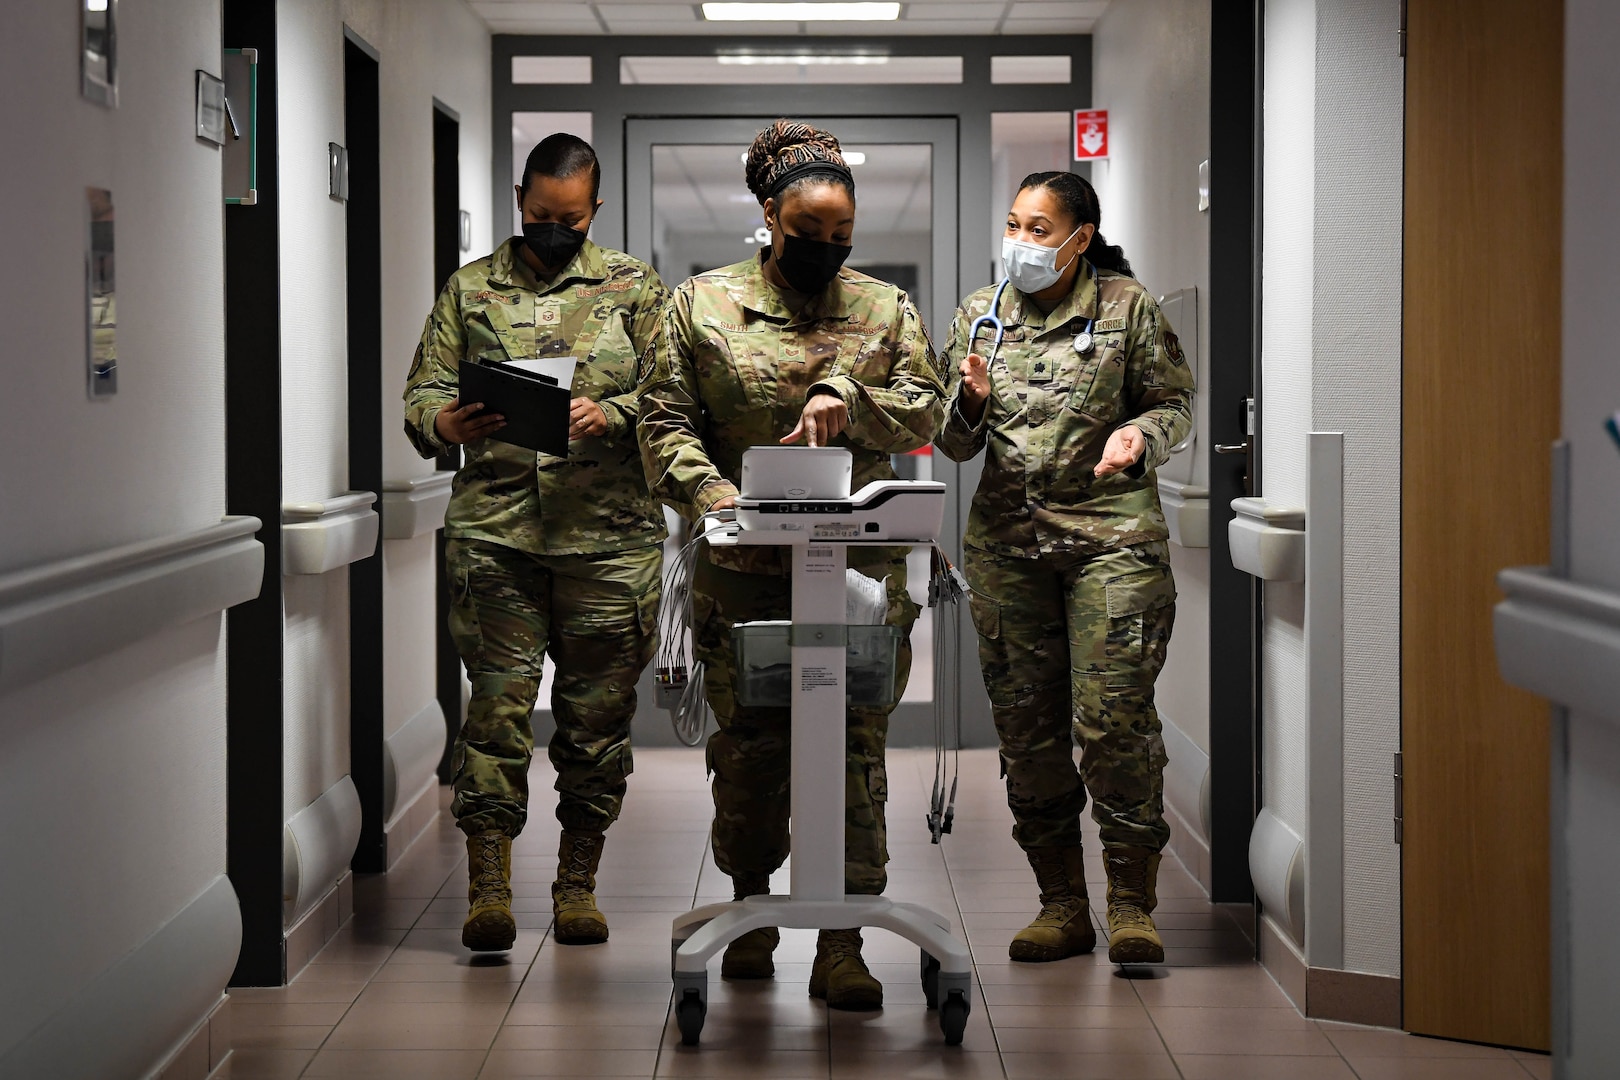 Airmen assigned to the 86th Medical Group discuss training for medics regarding the new ElectroCardiogram (EKG) at Ramstein Air Base, Germany, Feb. 3, 2022. An EKG takes a snapshot of a patient's cardiac rhythms, which helps medical providers diagnose and treat dysrhythmia. (U.S. Air Force photo by Airman 1st Class Jared Lovett)